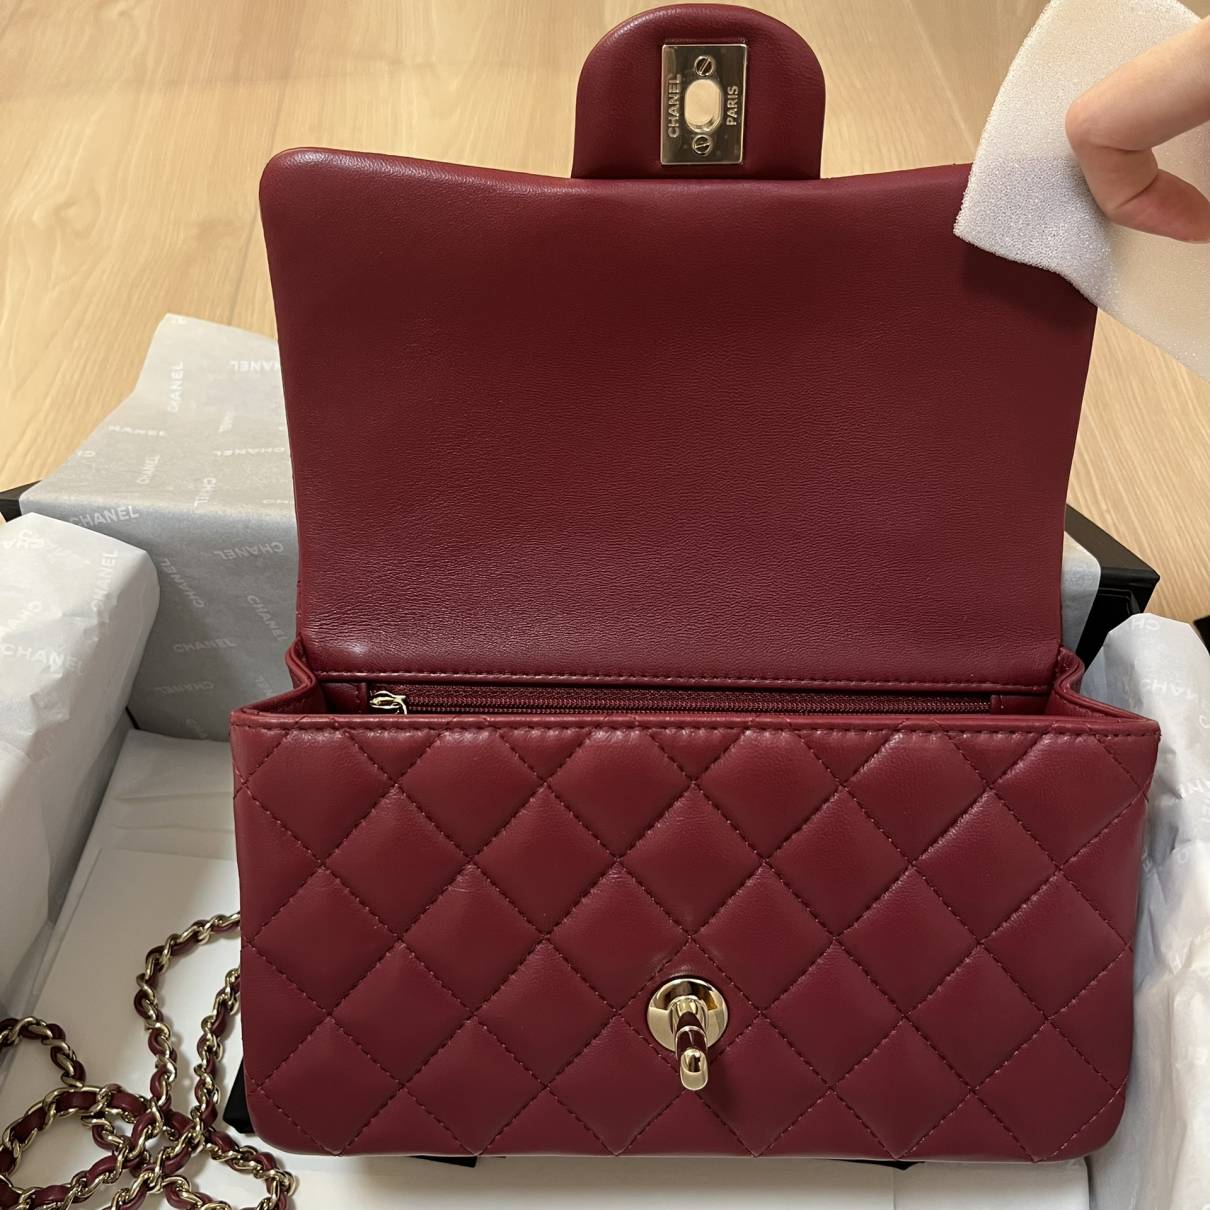 Chanel - Authenticated Timeless Classique Top Handle Handbag - Leather Burgundy for Women, Never Worn